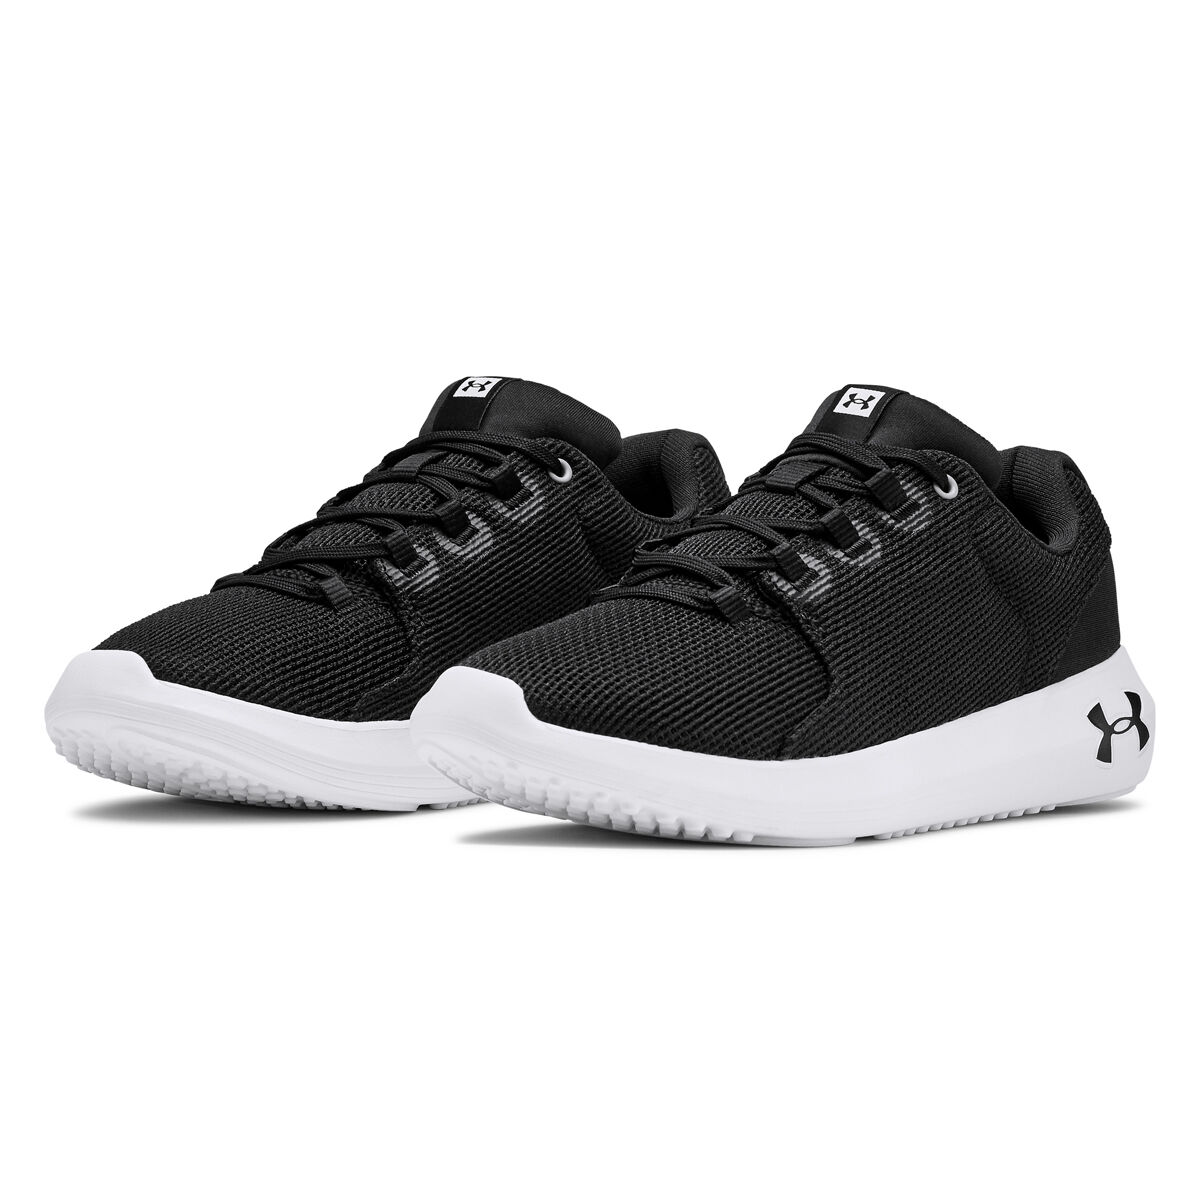 white under armour tennis shoes